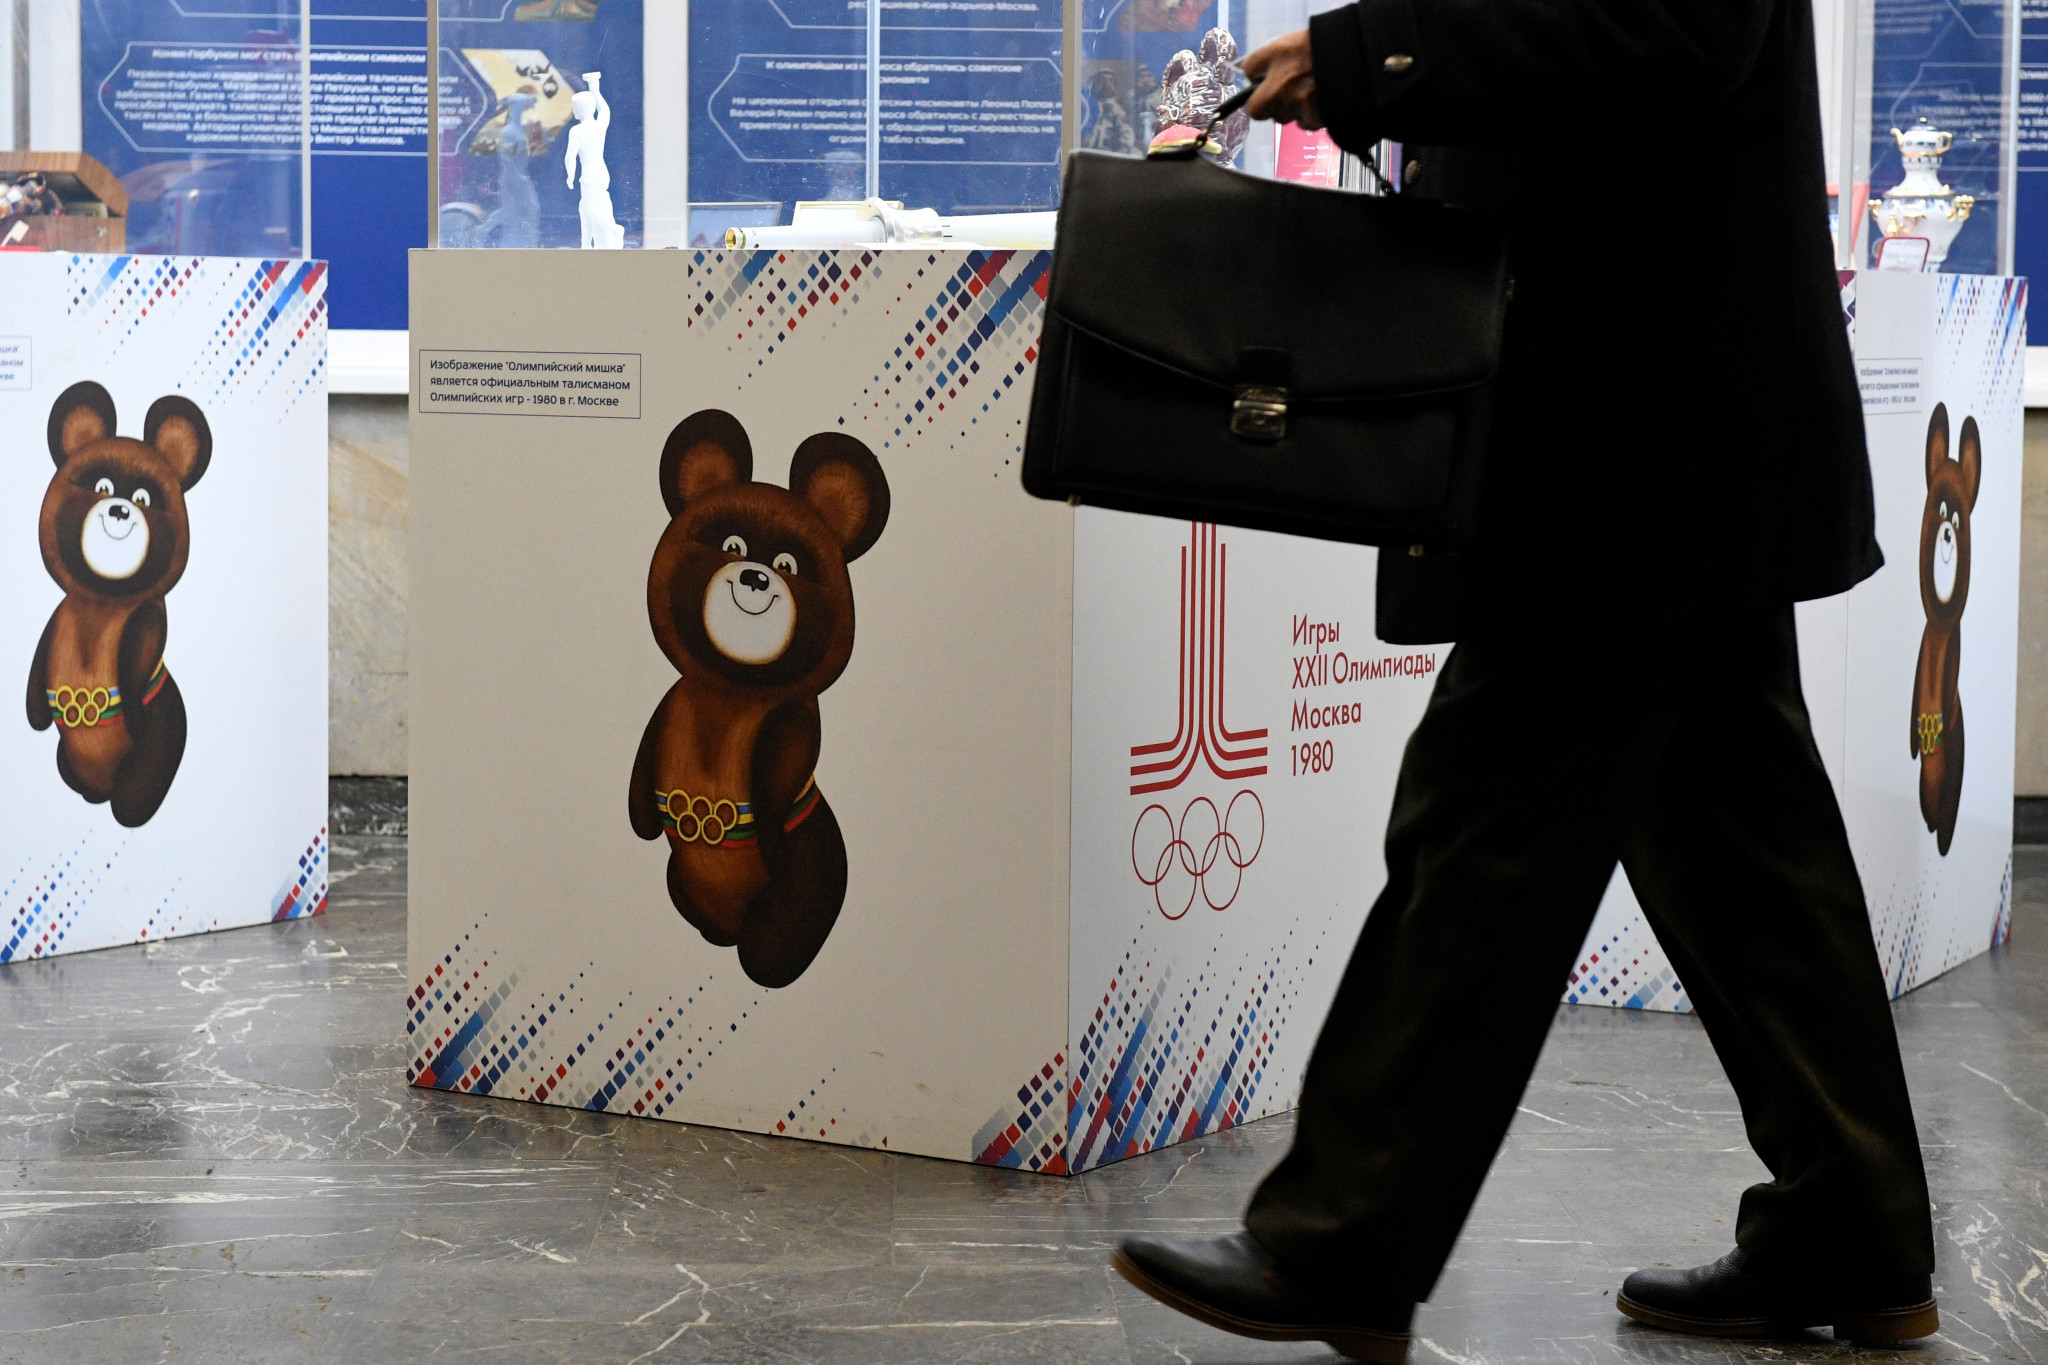 Russian athletes will be forced to compete under neutral status at Tokyo 2020 ©Getty Images